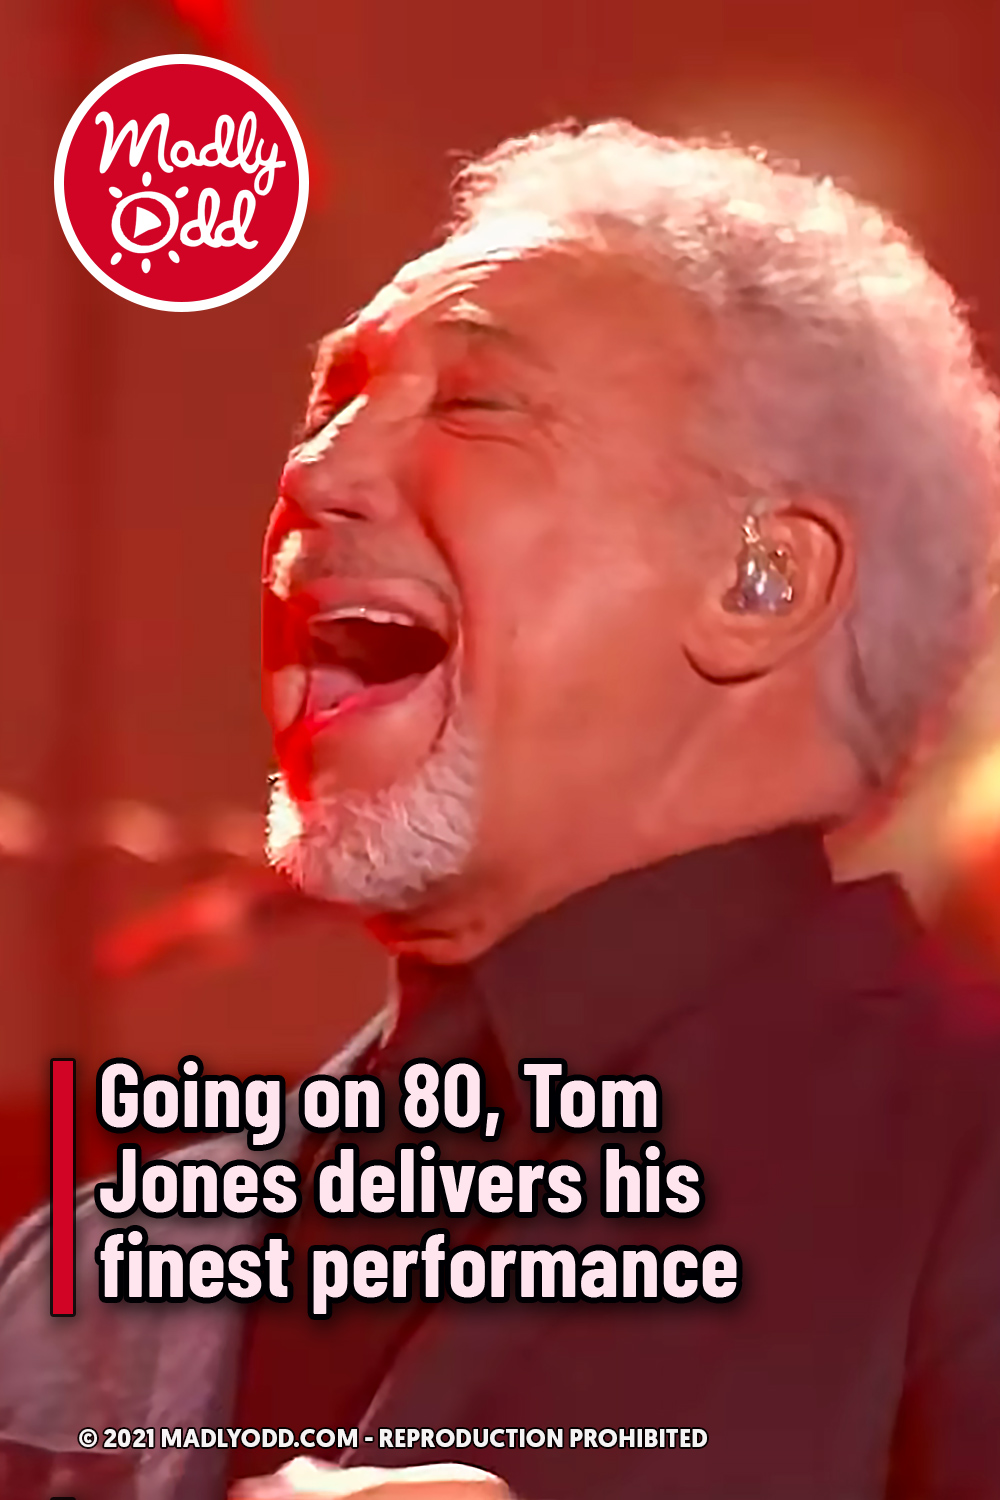 Going on 80, Tom Jones delivers his finest performance